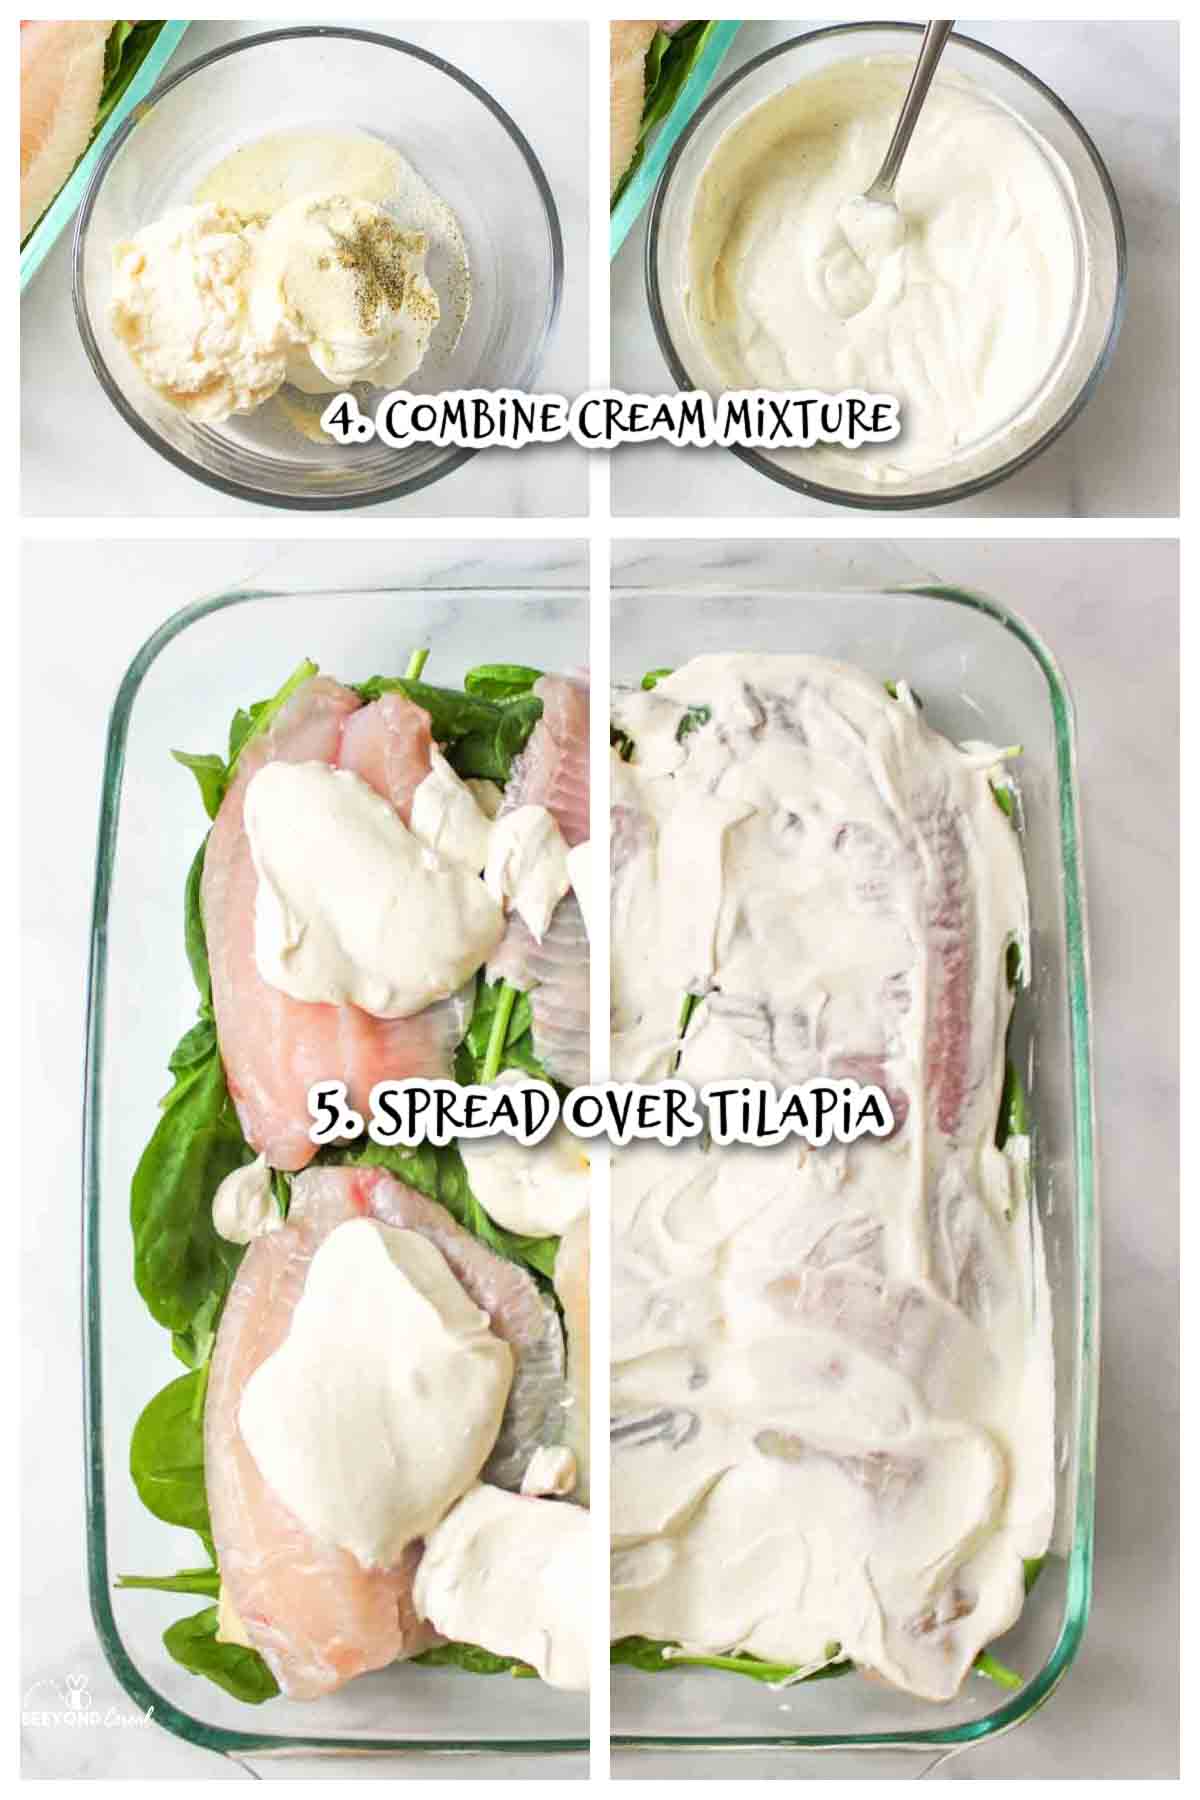 step 4 and 5 for making creamy tilapia, make the cream sauce and spread it over the fish fillets.